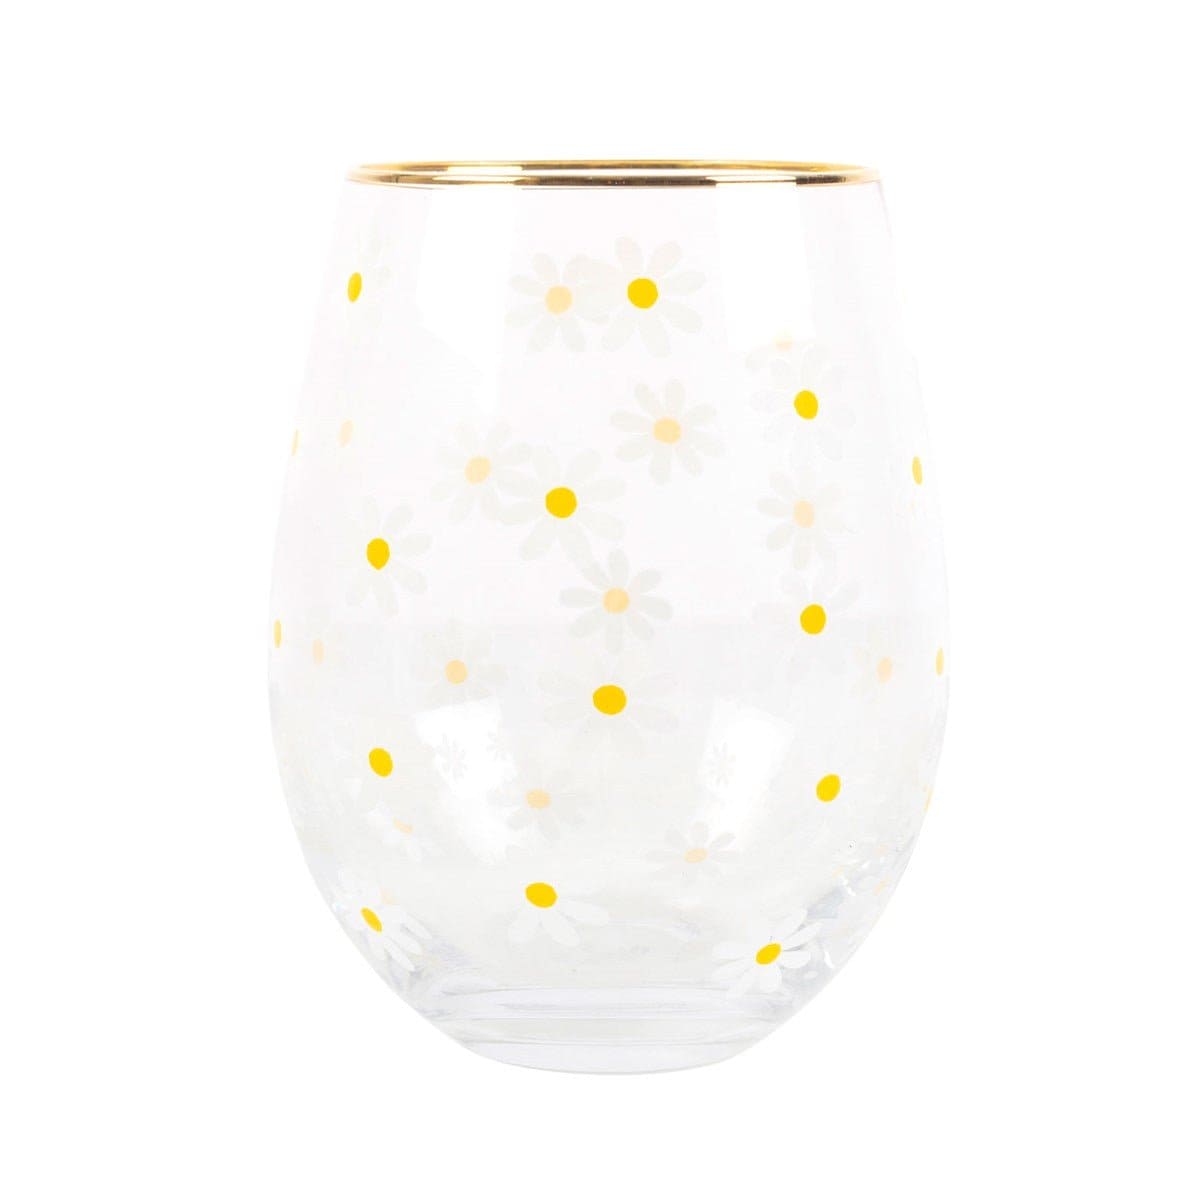 Daisy Print Stemless Wine Glass With Gold-Tone Rim - Stemless Wine Glass by Jones Home & Gifts